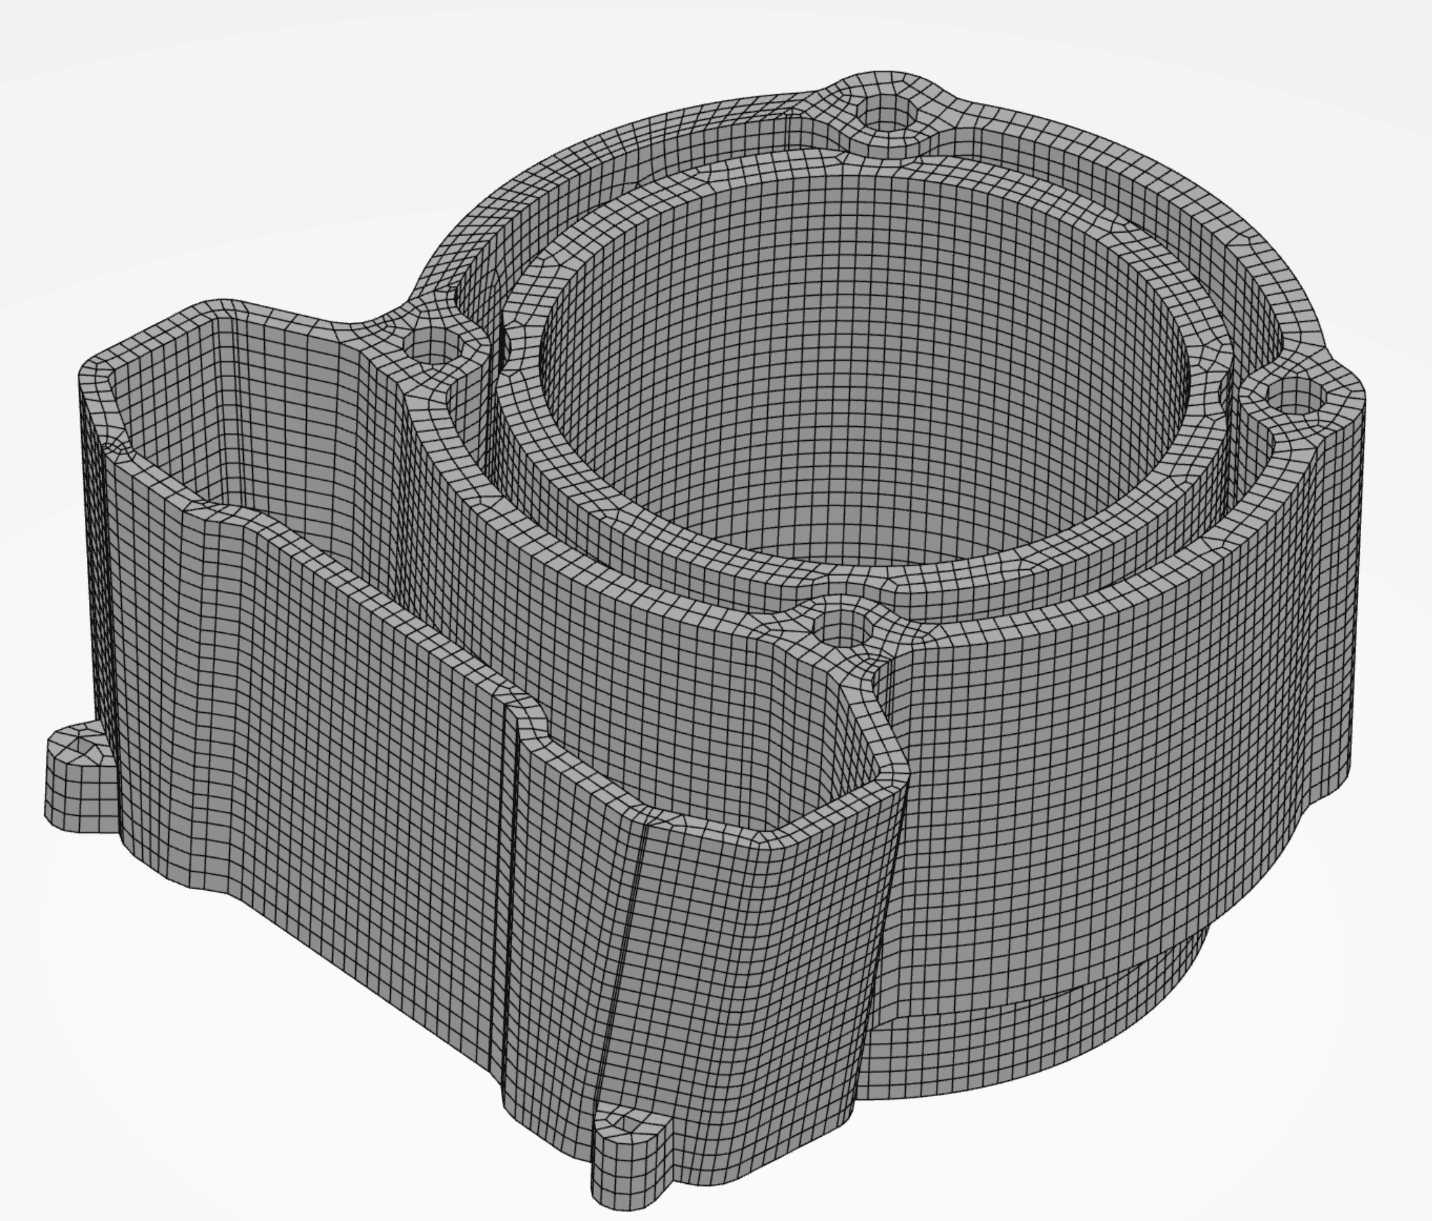 Here is an example of what the mesh looks like in 3DEXPERIENCE Simulation after the part is fully partitioned.